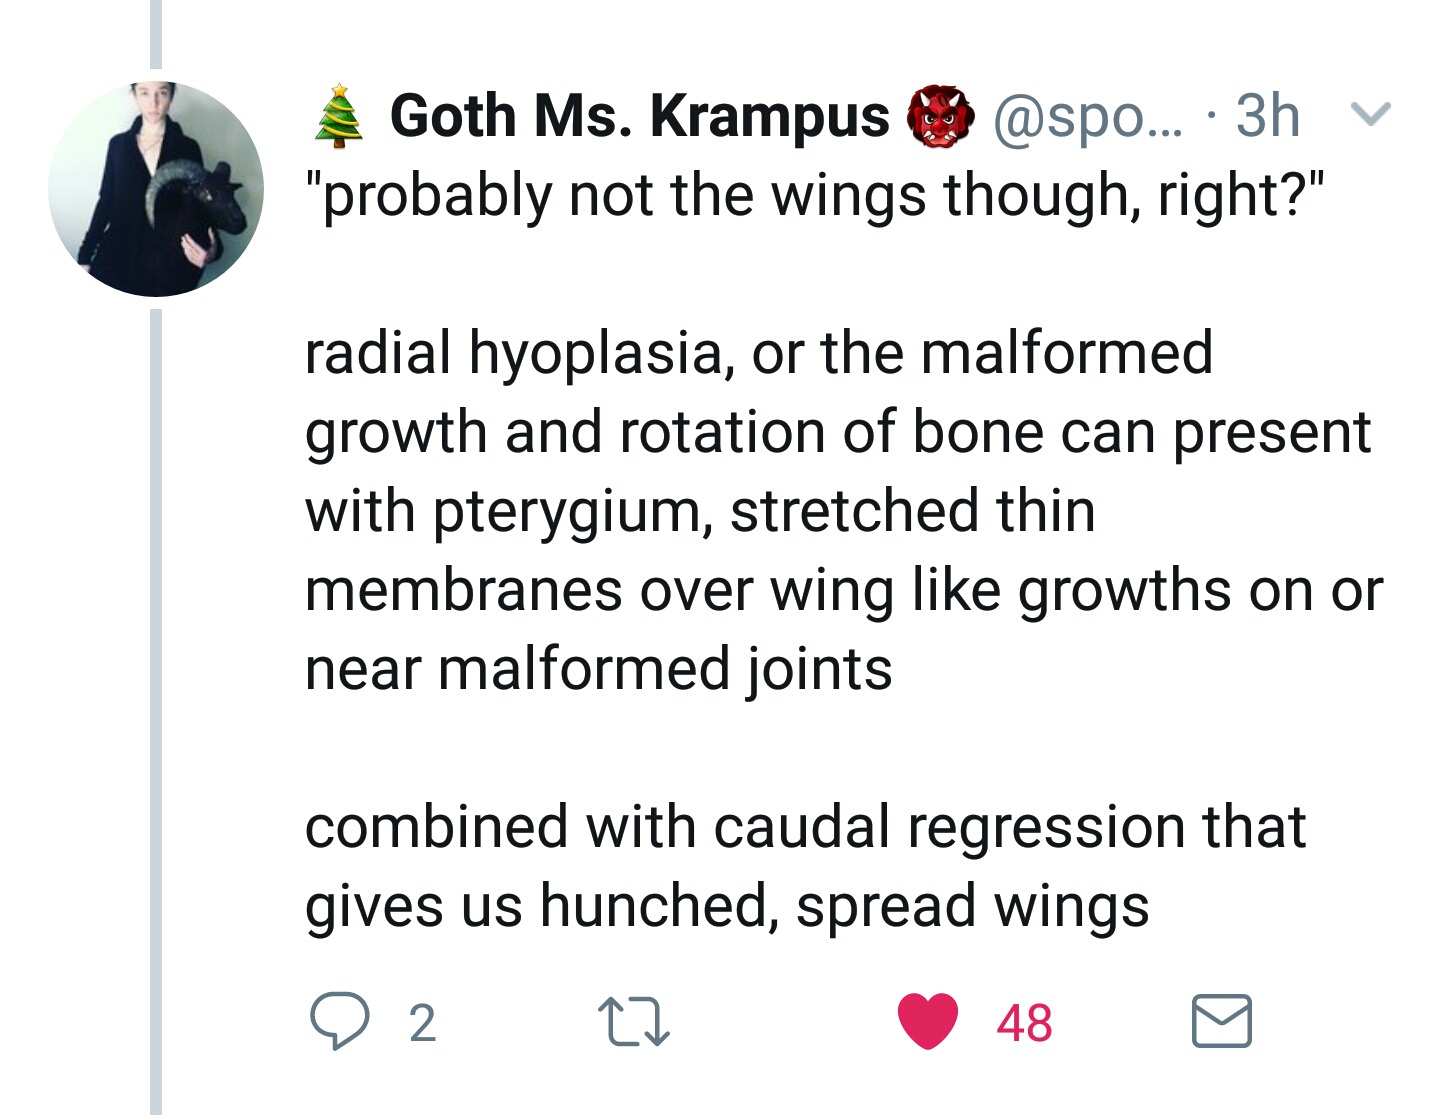 angle - Goth Ms. Krampus ... 3h v "probably not the wings though, right?" radial hyoplasia, or the malformed growth and rotation of bone can present with pterygium, stretched thin membranes over wing growths on or near malformed joints combined with cauda